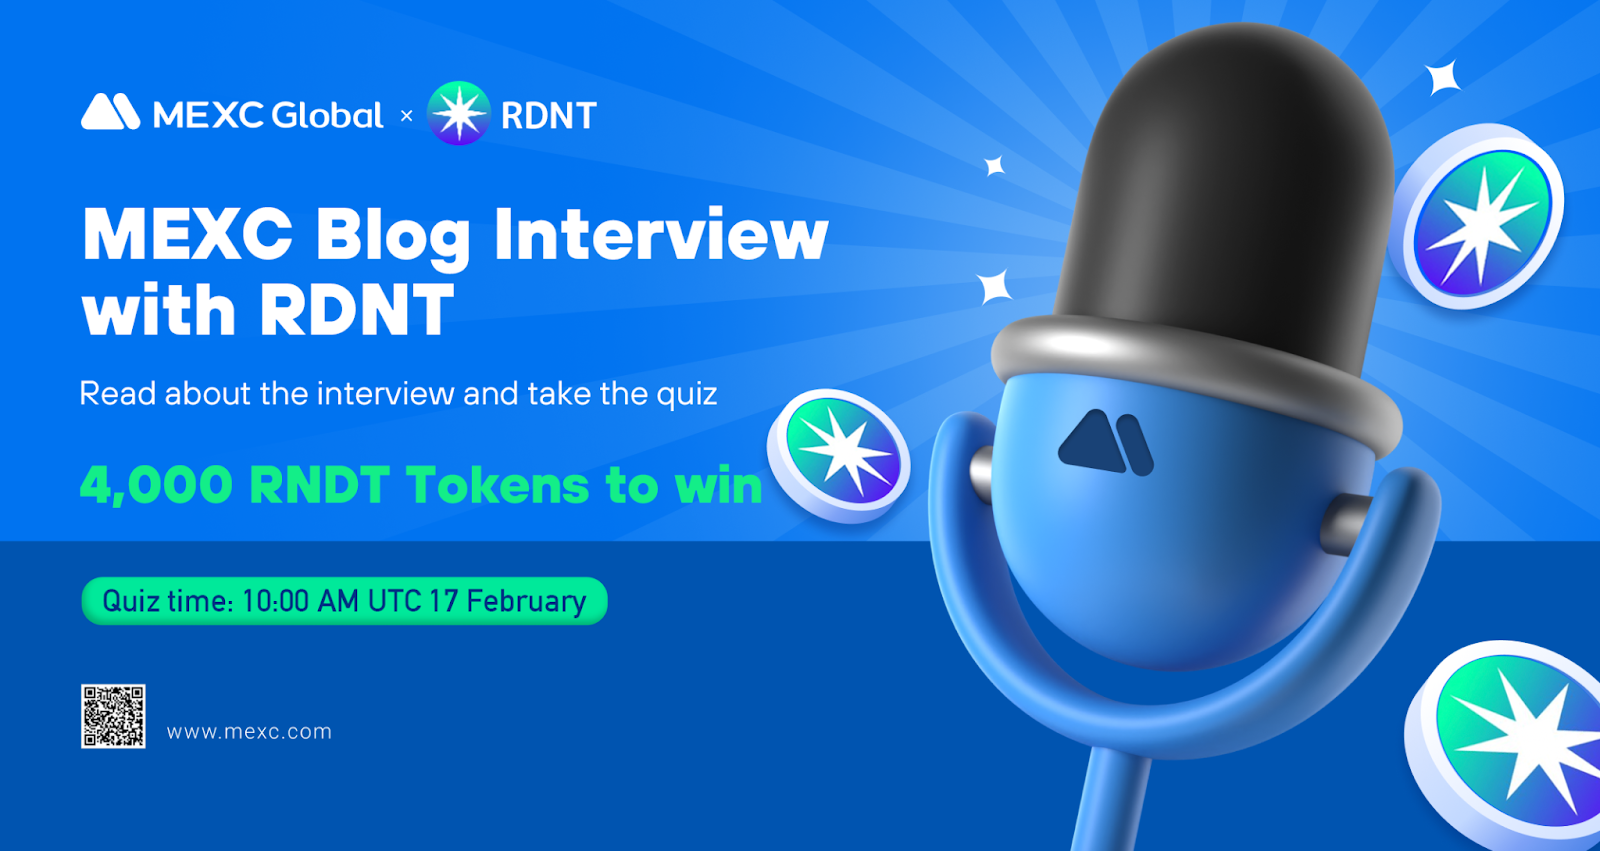  MEXC Blog Interview with RDNT